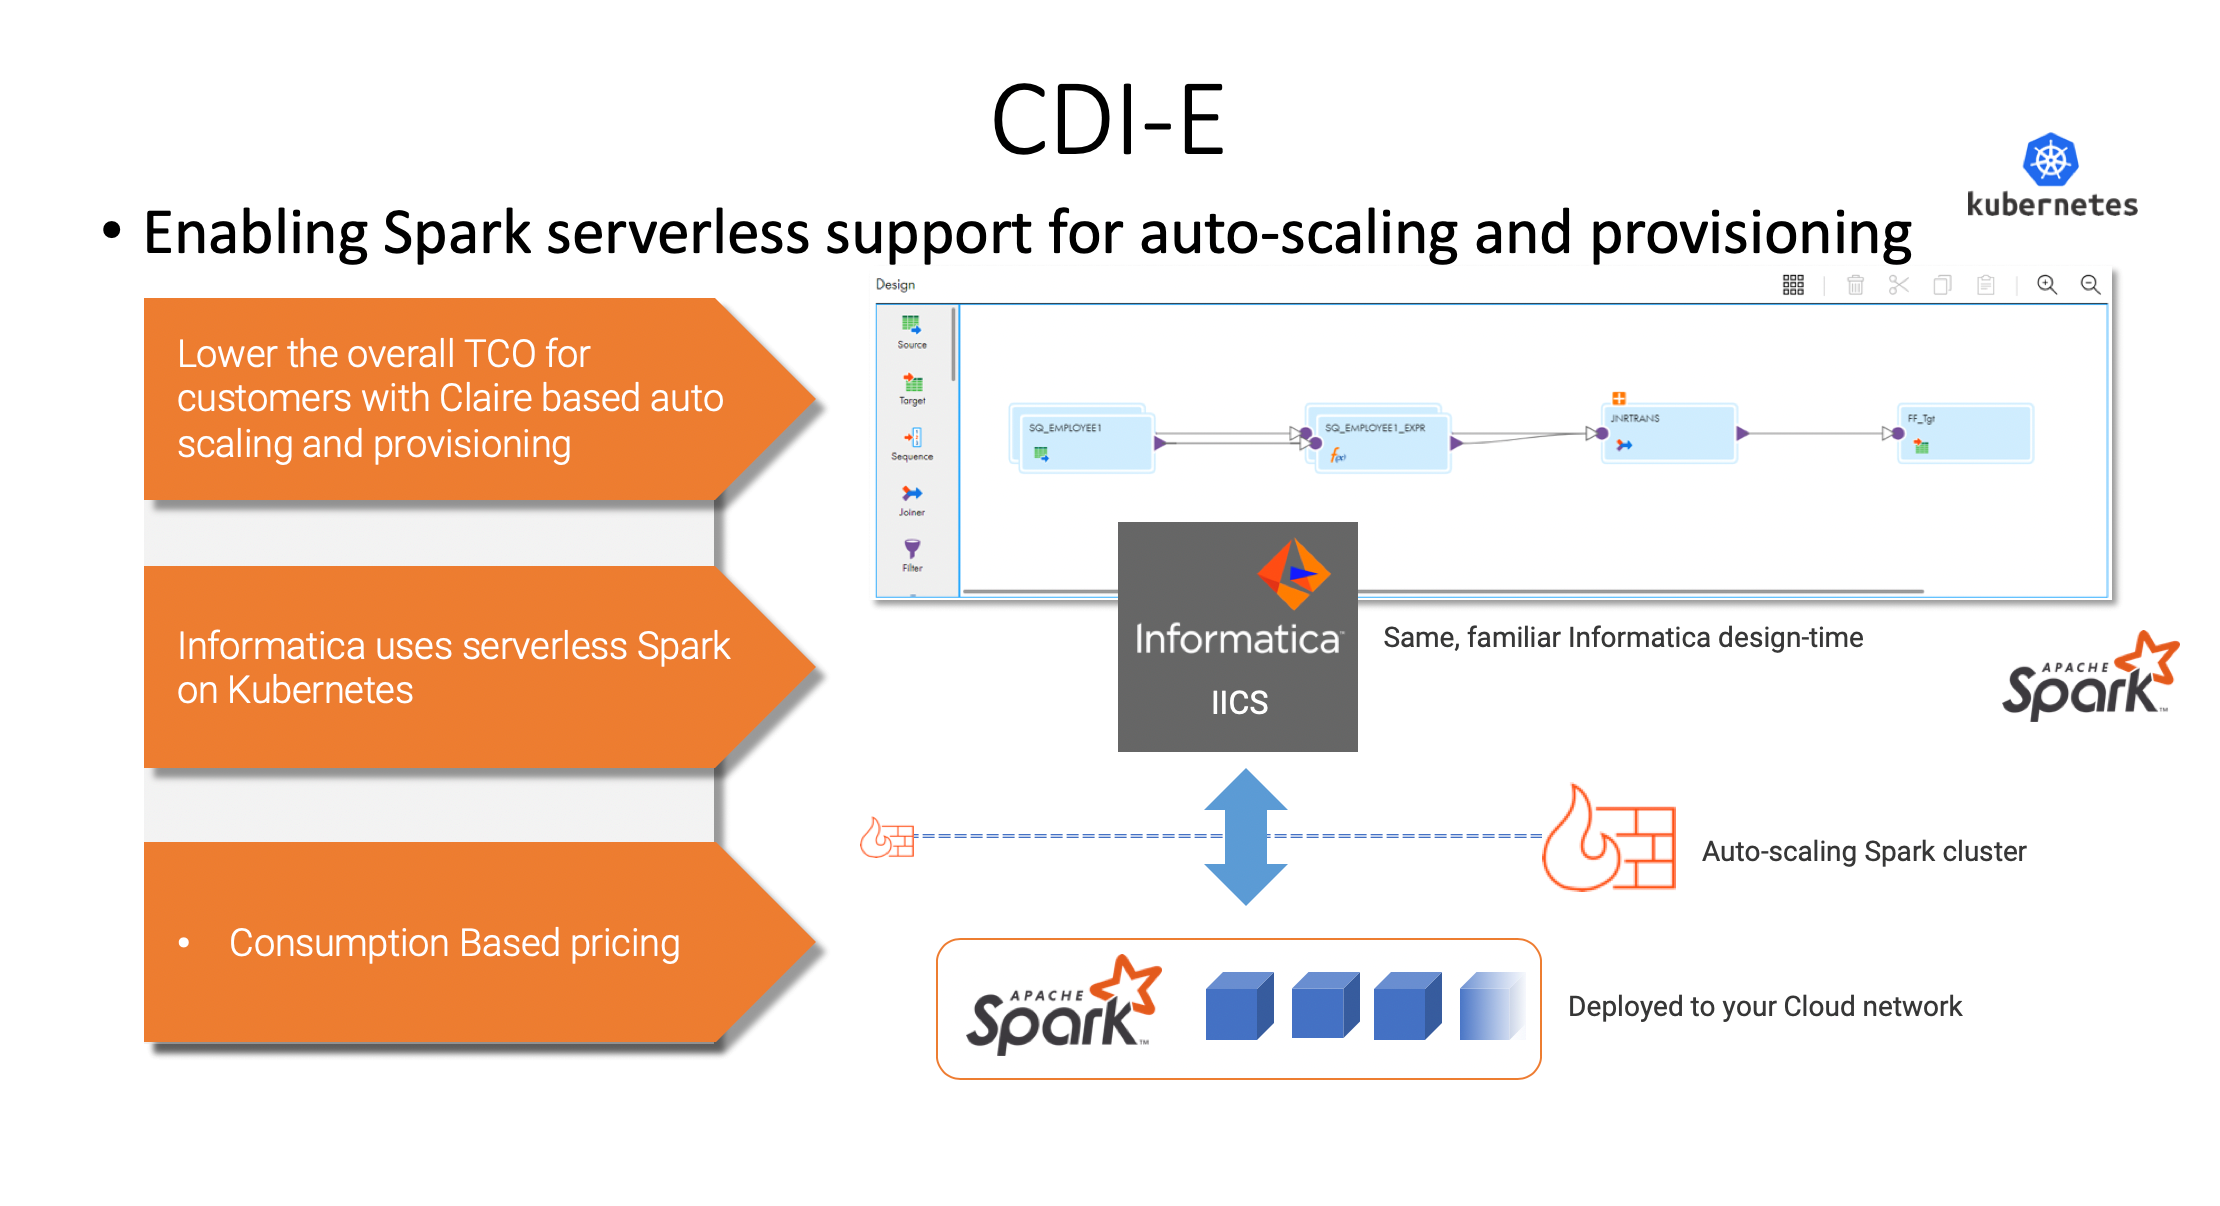 Spark serverless support for auto-scaling and provisioning